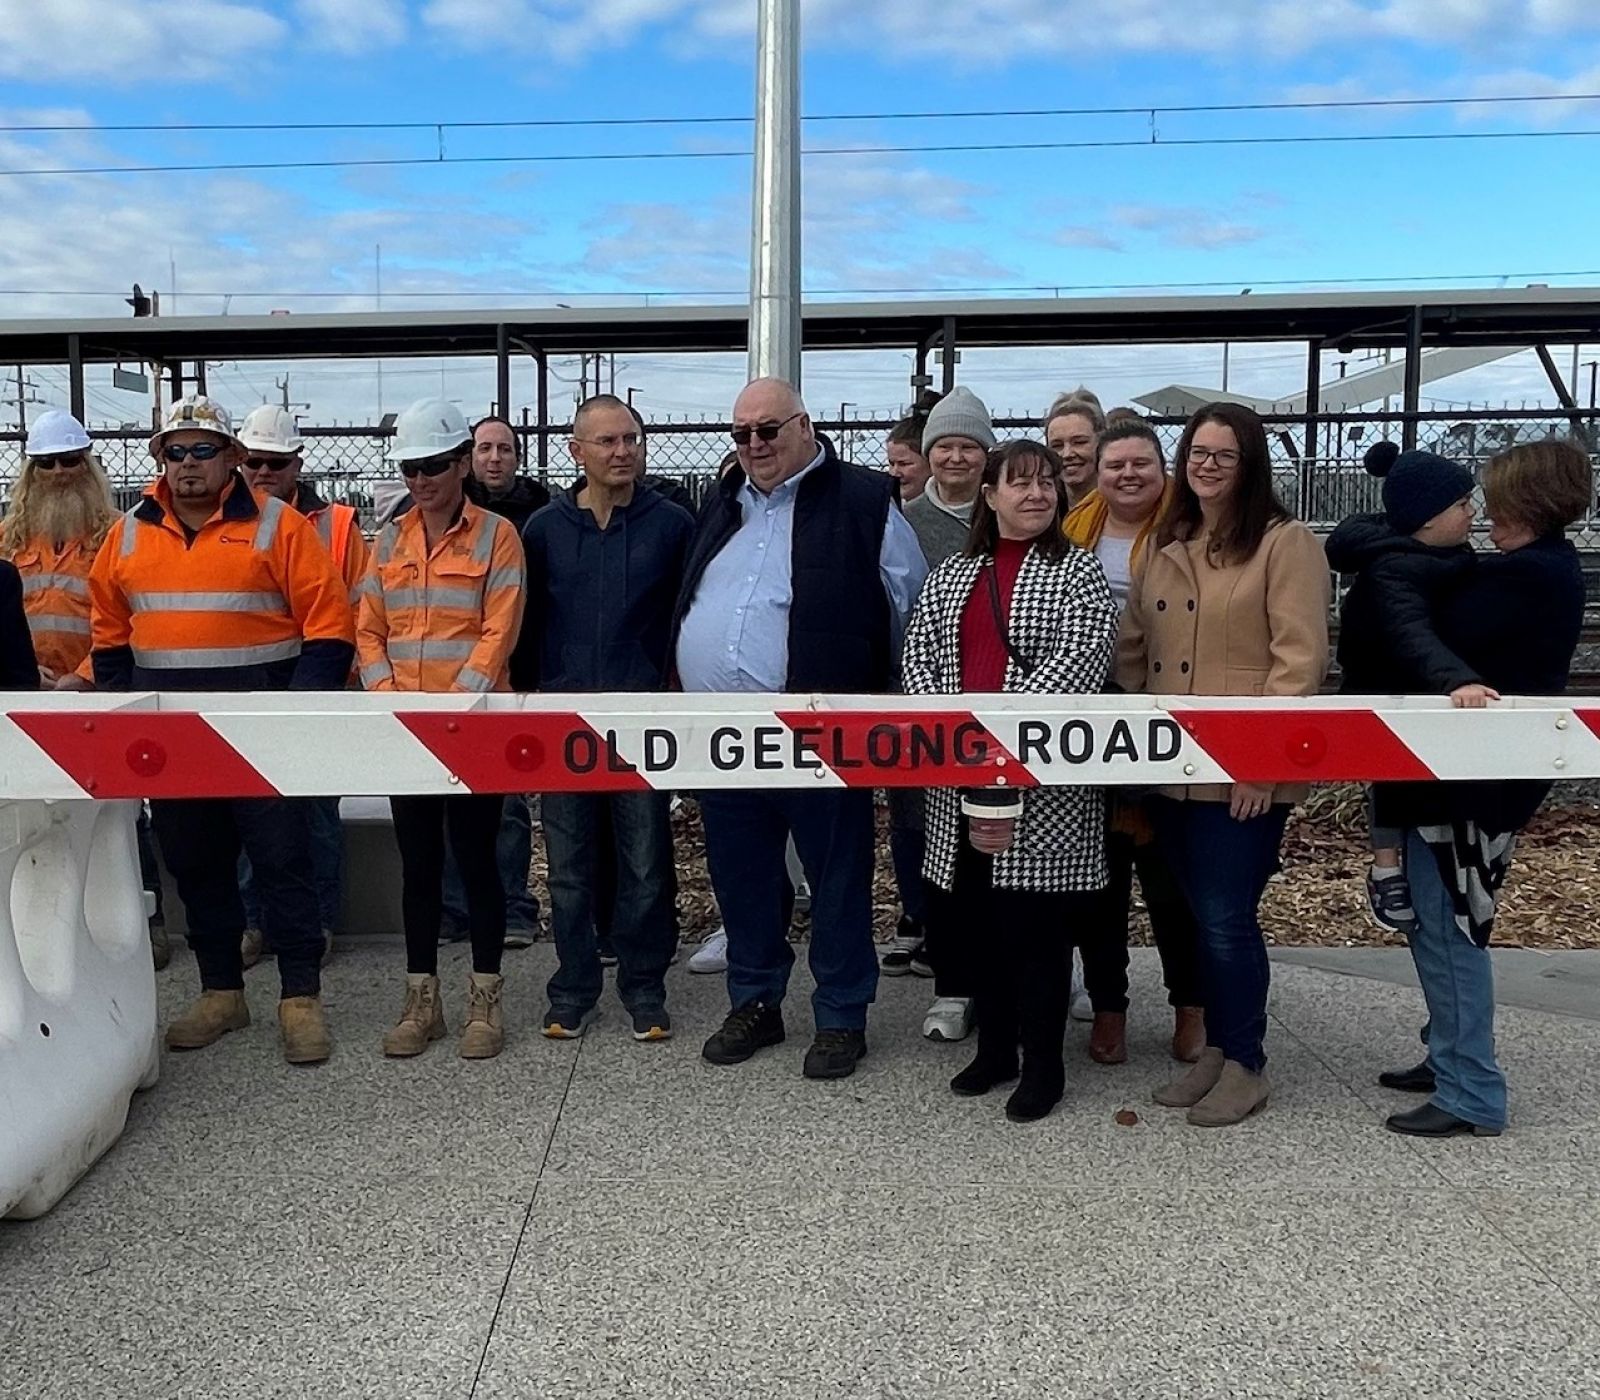 The Old Geelong Road boom gate was gifted to the Hopper family